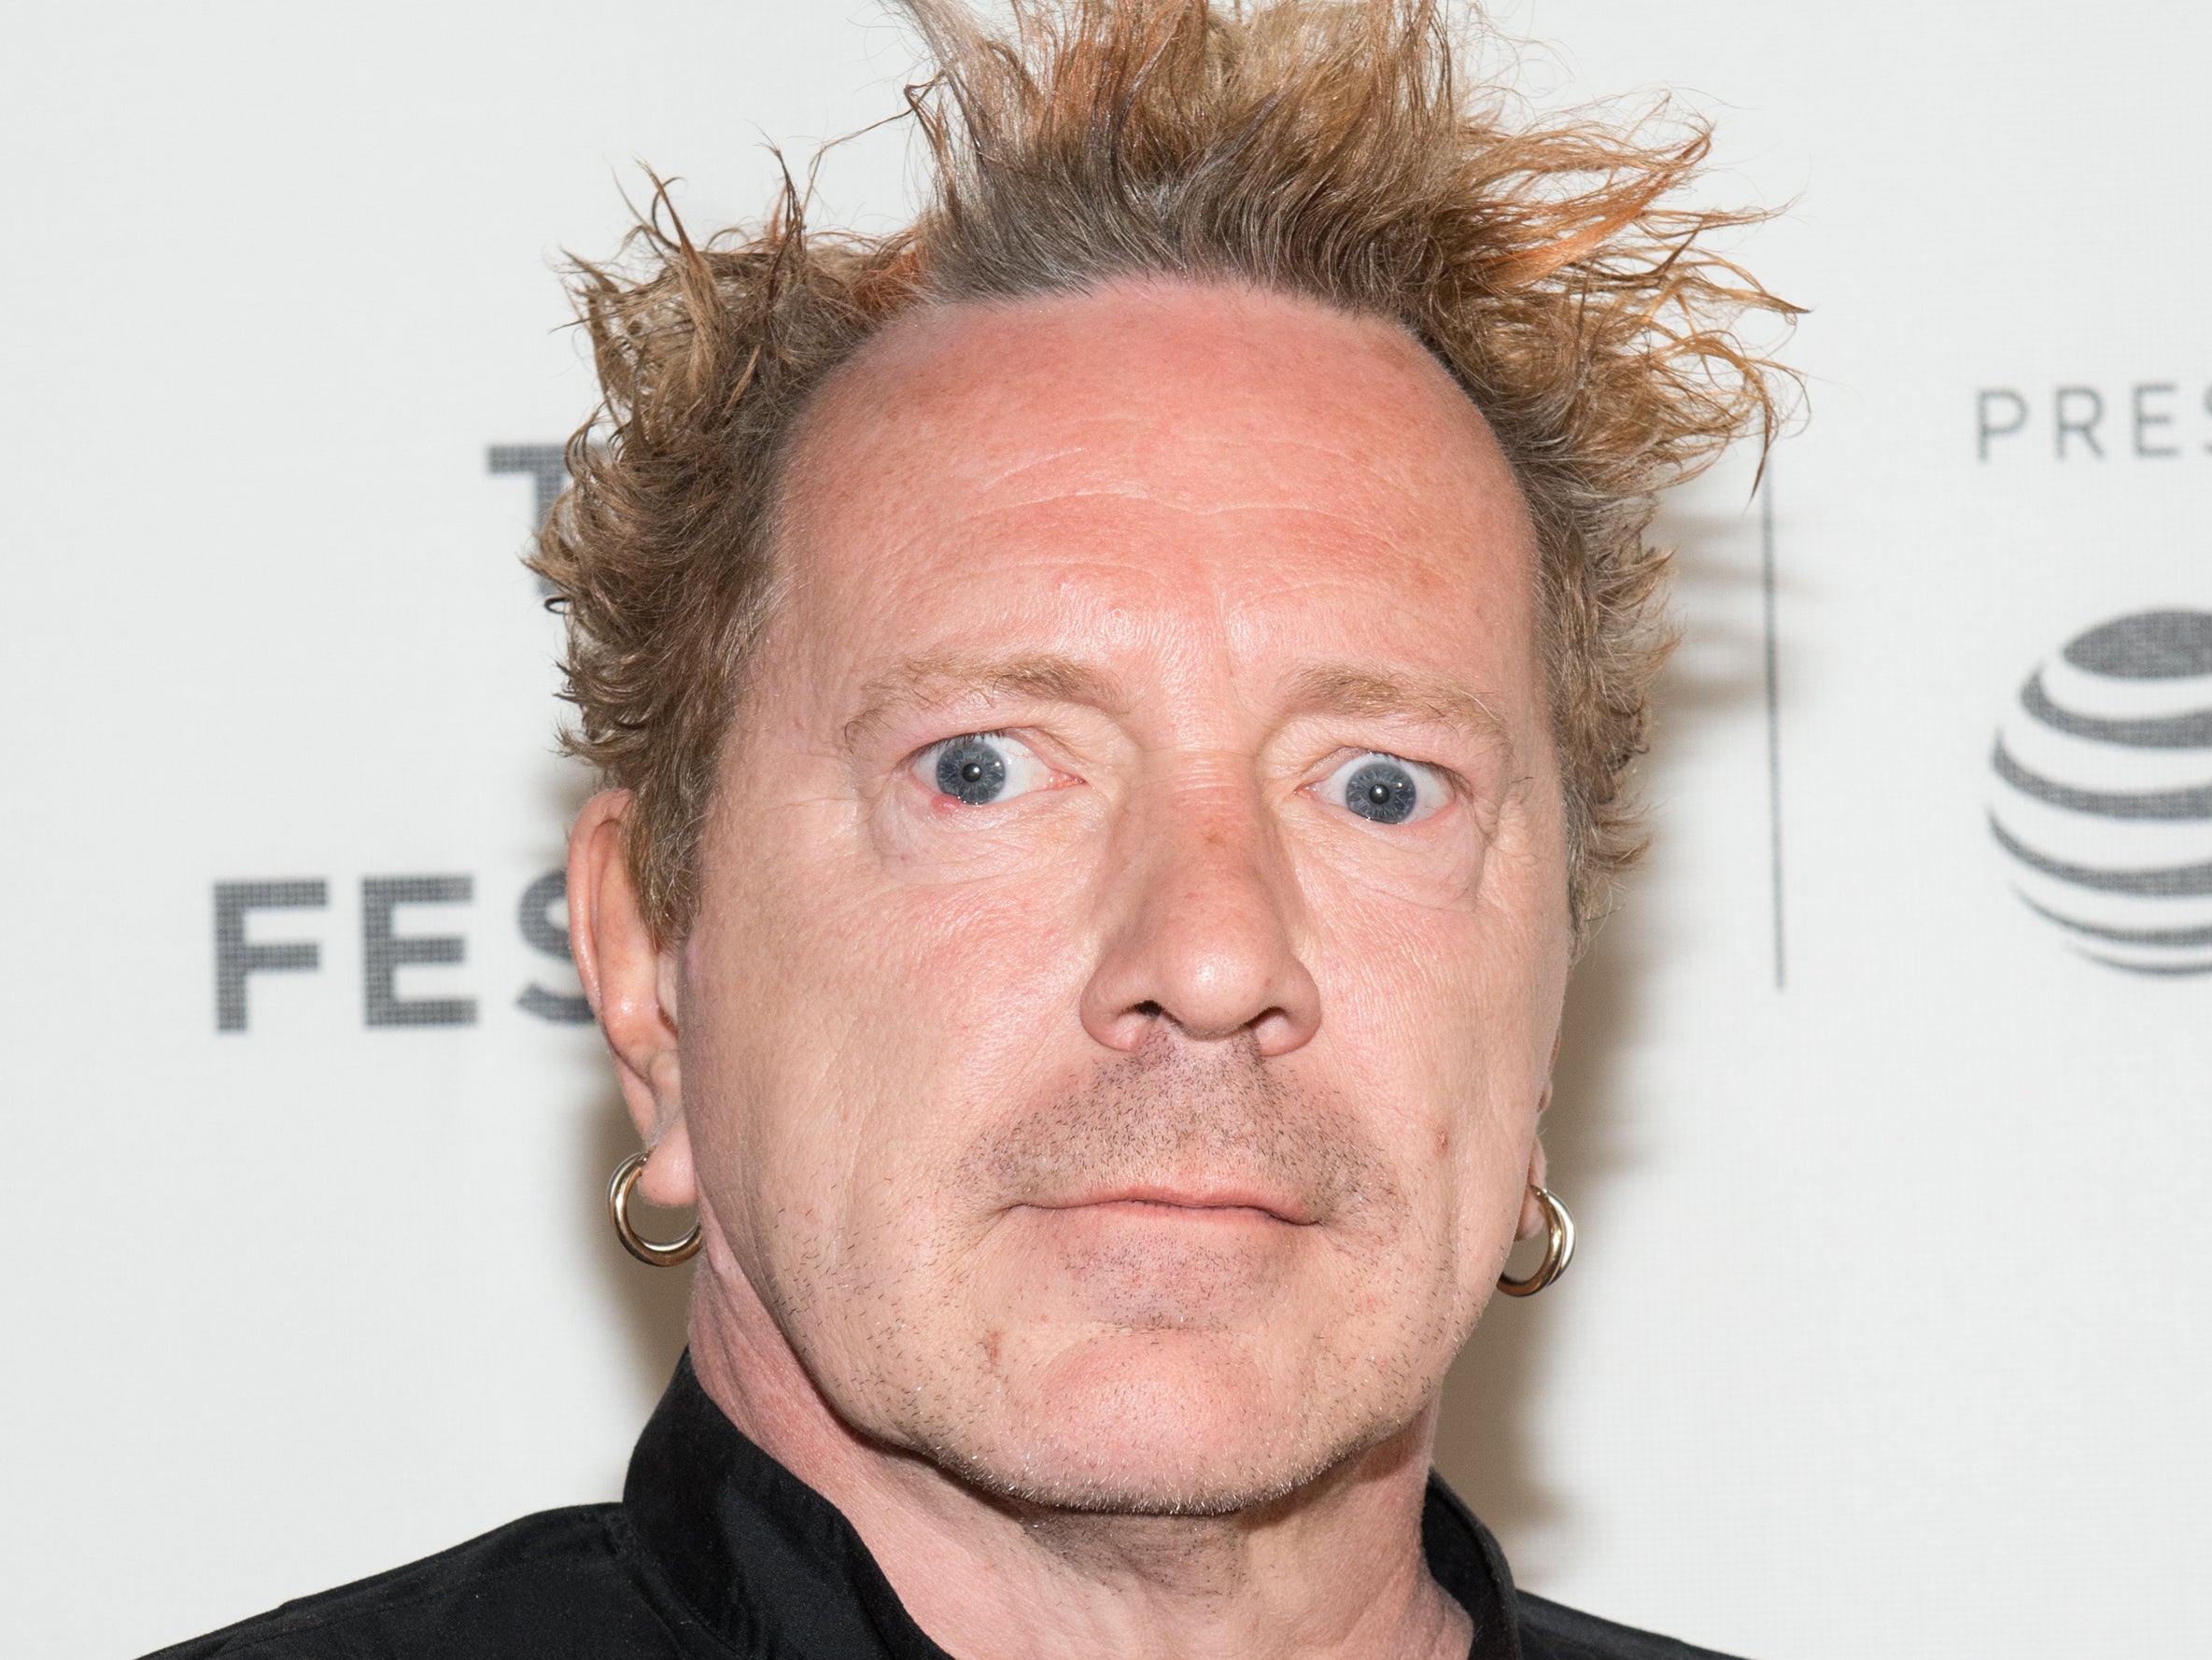 Lydon said he voted for Trump because he ‘wasn’t a politician’